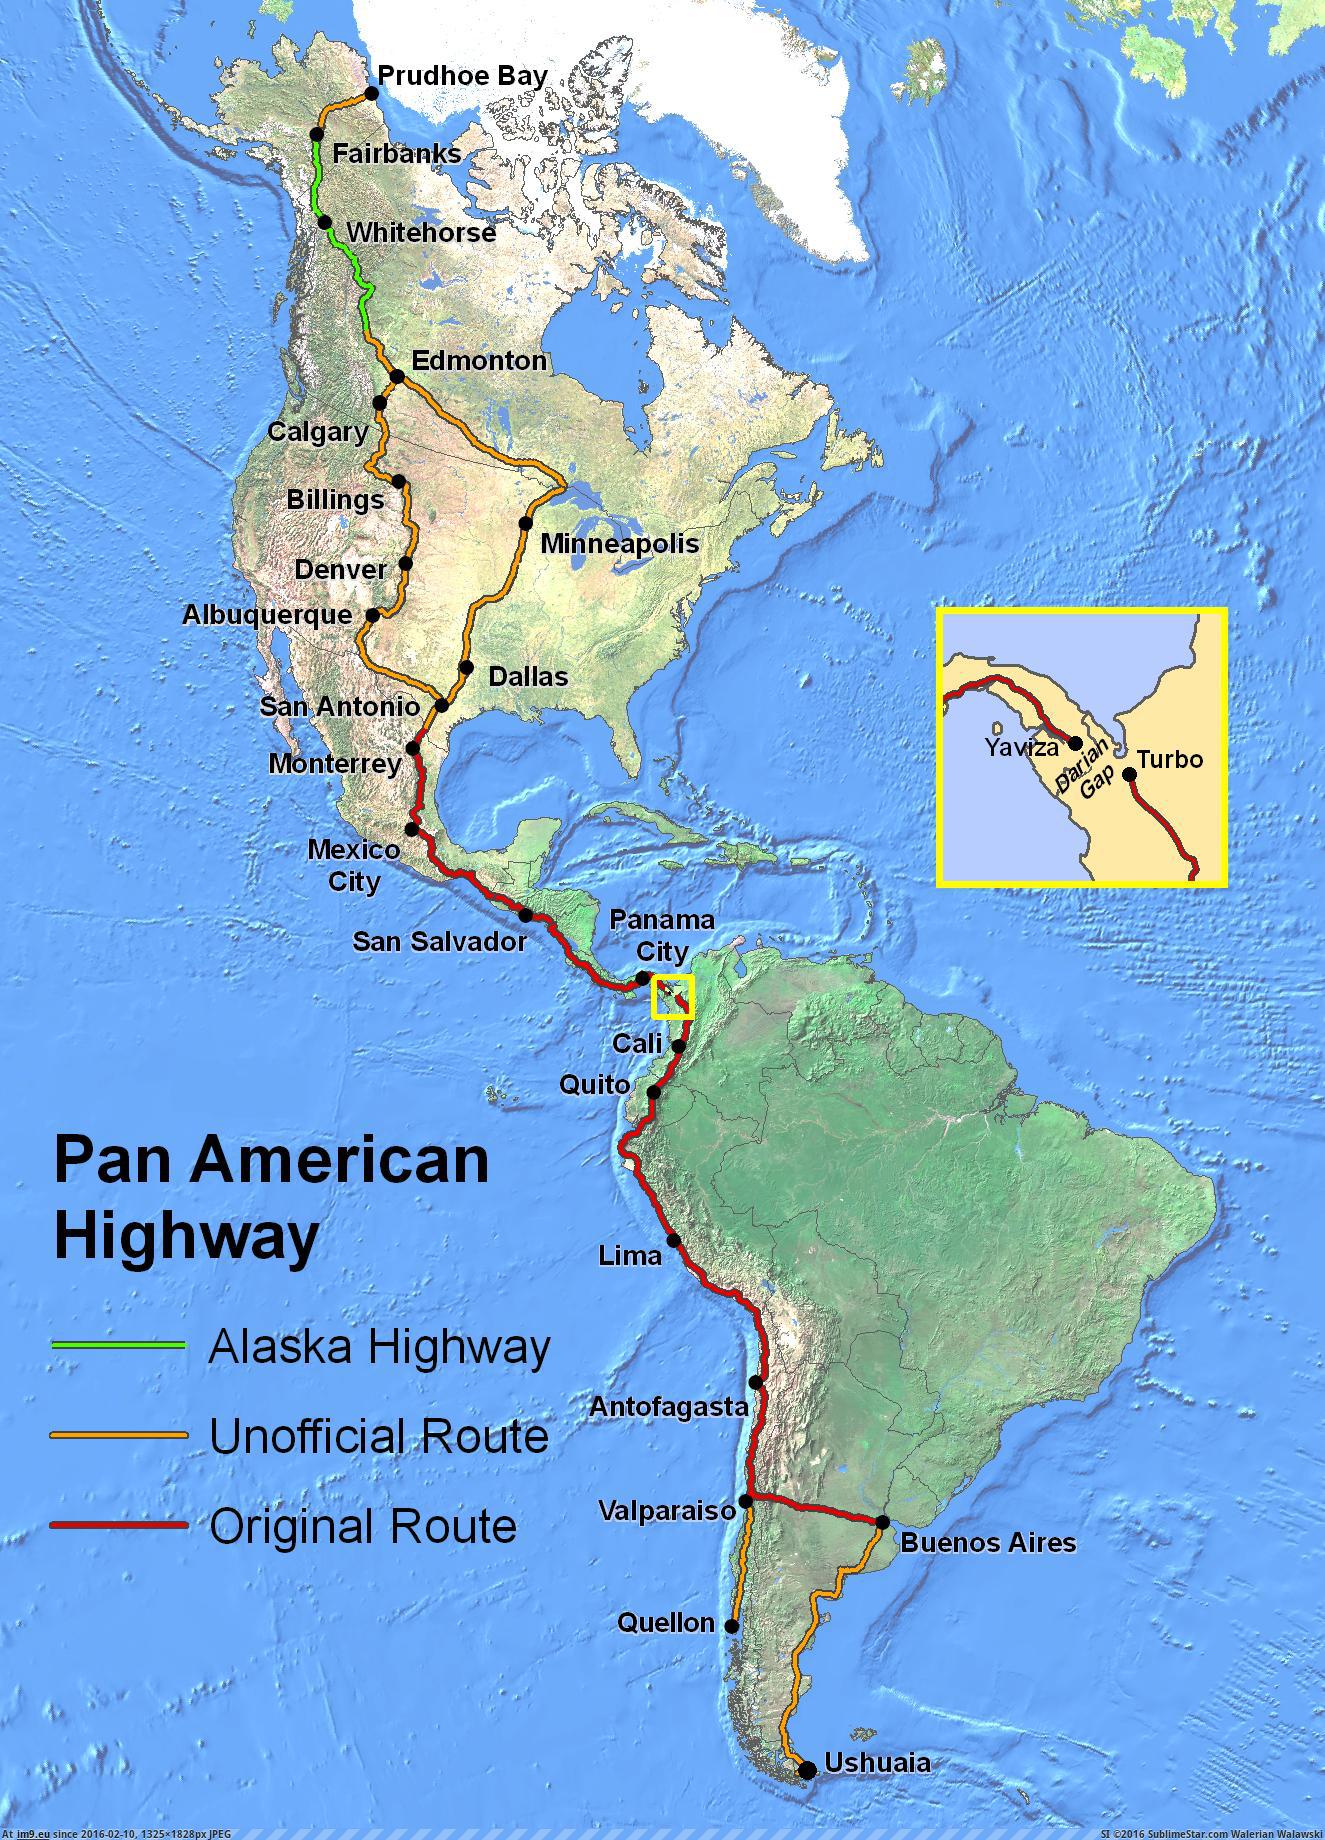 [Mapporn] The Pan American Highway. The longest road in the world. [1325x1825] (in My r/MAPS favs)